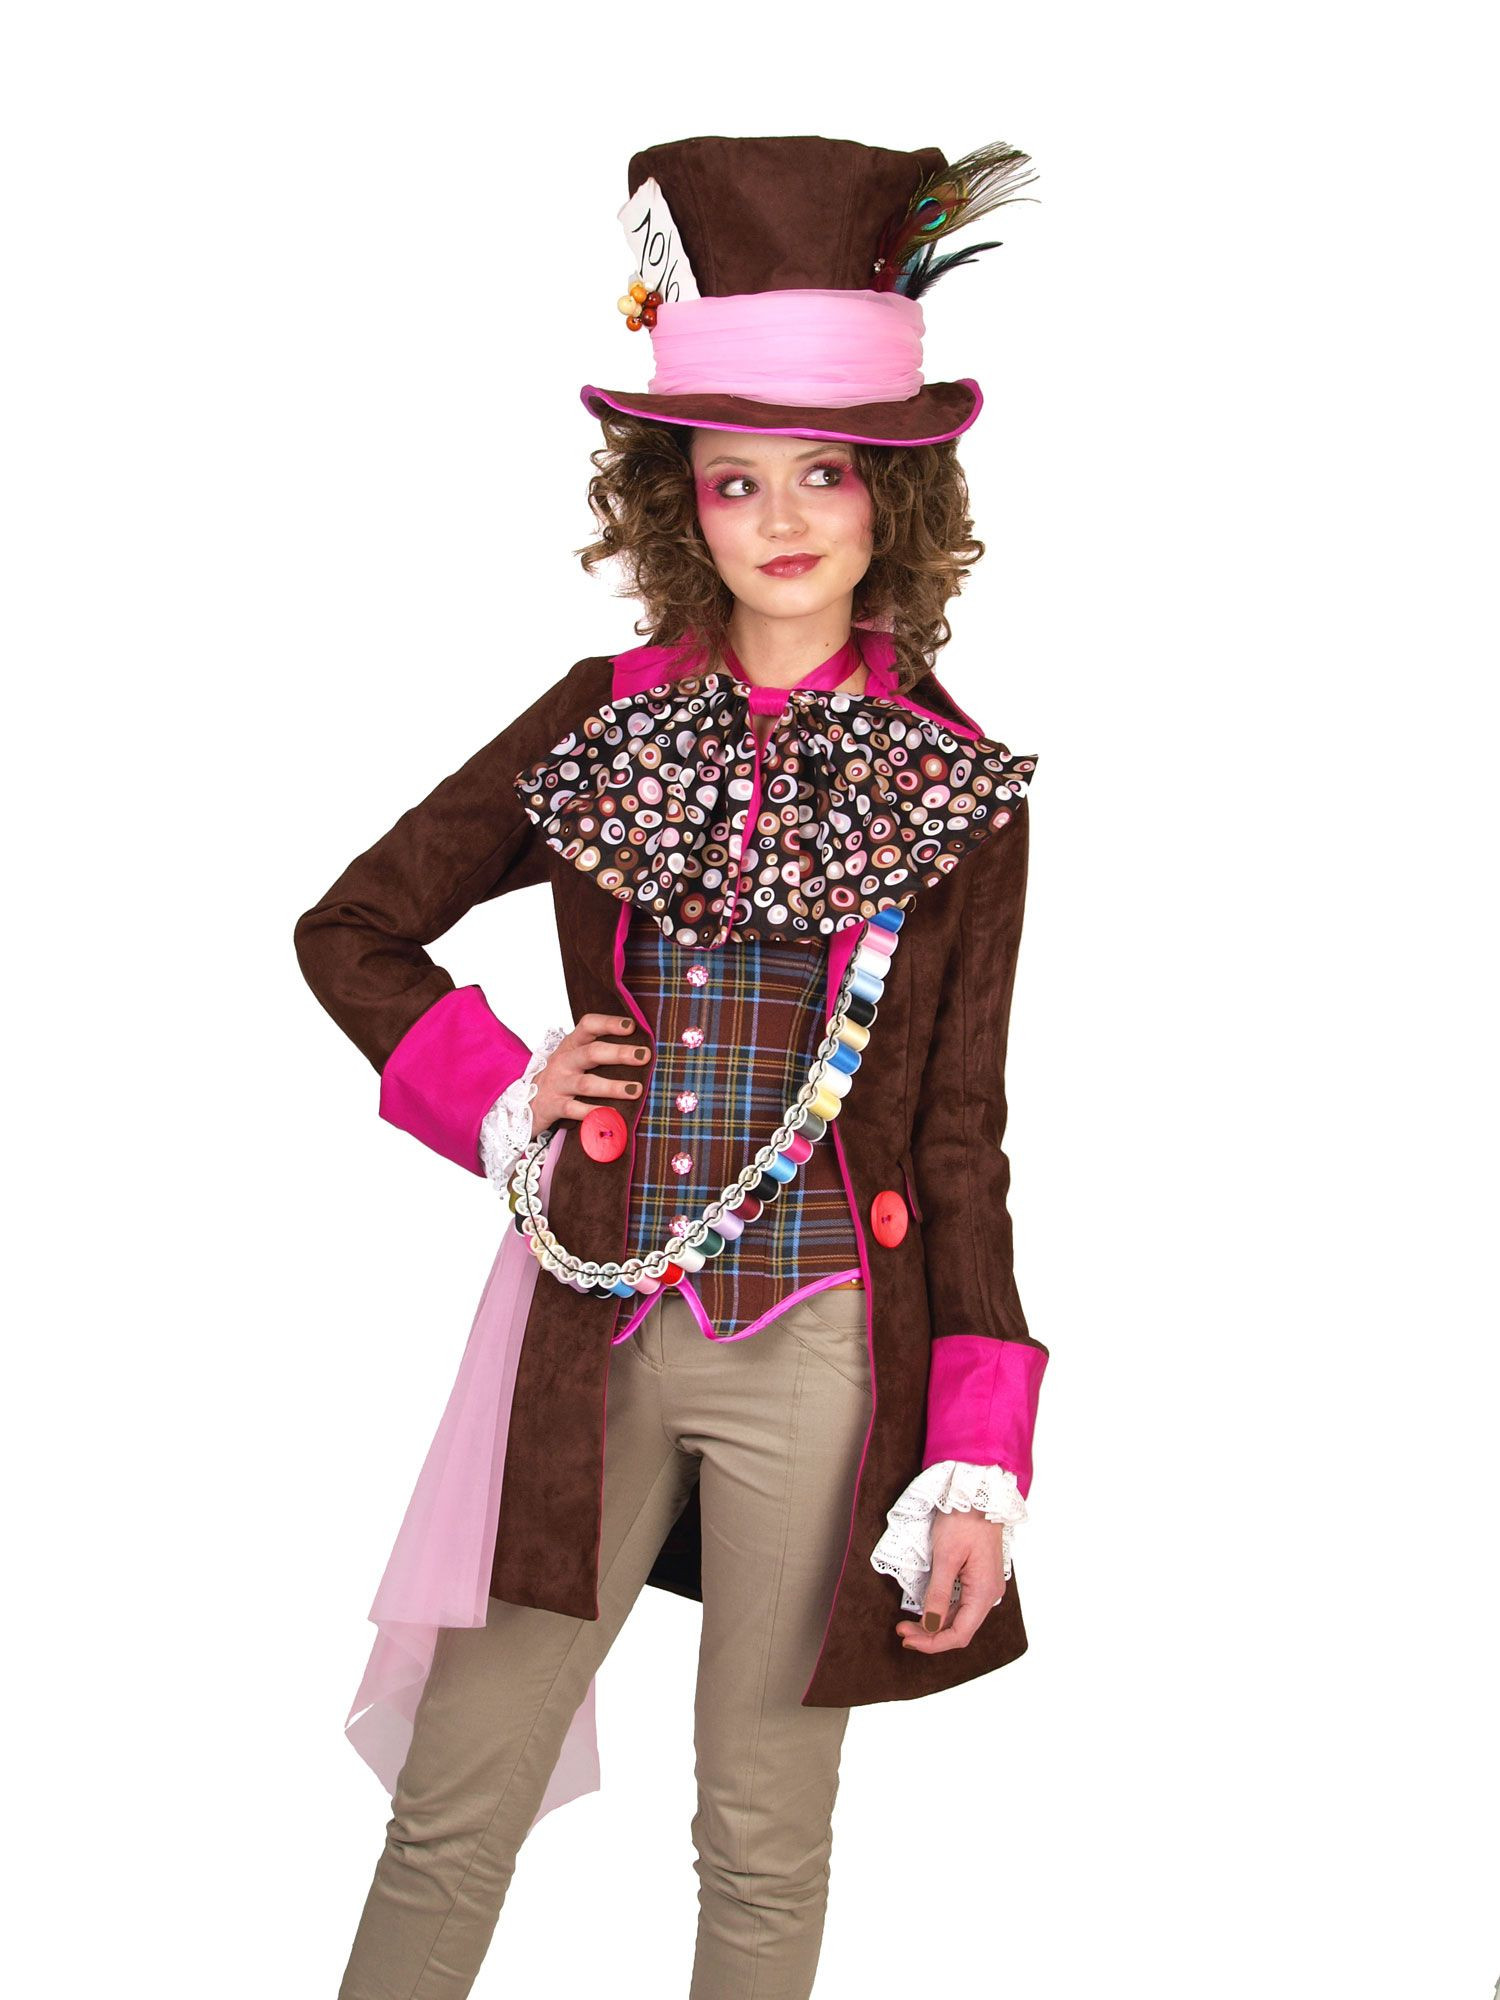 Tea Party Costume Ideas
 NCR Mad hatter tea party clothing